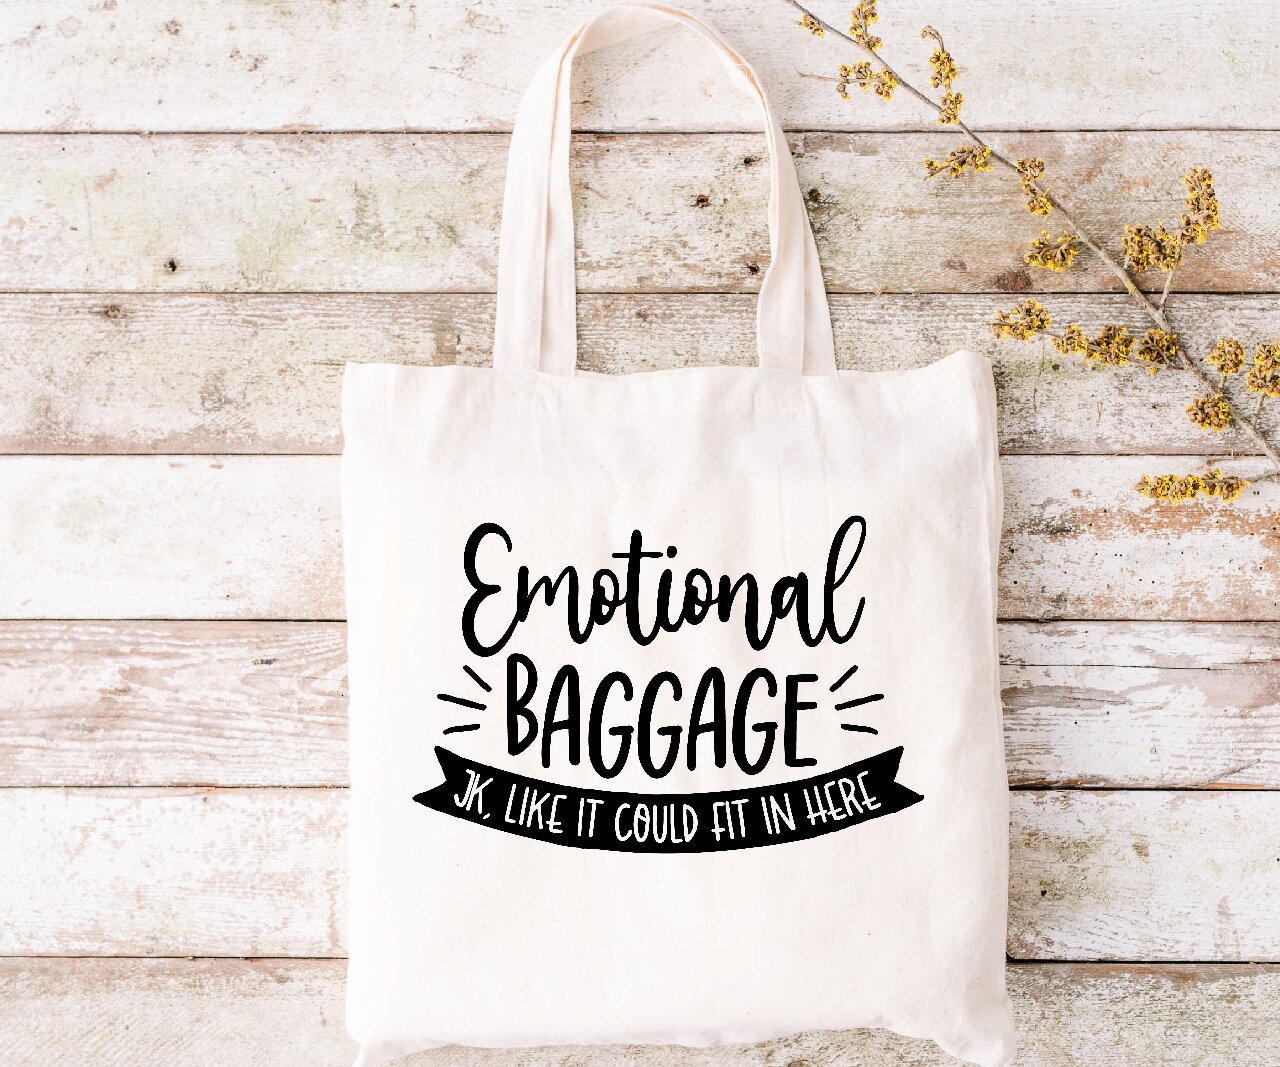 Emotional Baggage JK, Like It Could Fit In Here  - Tote Bag